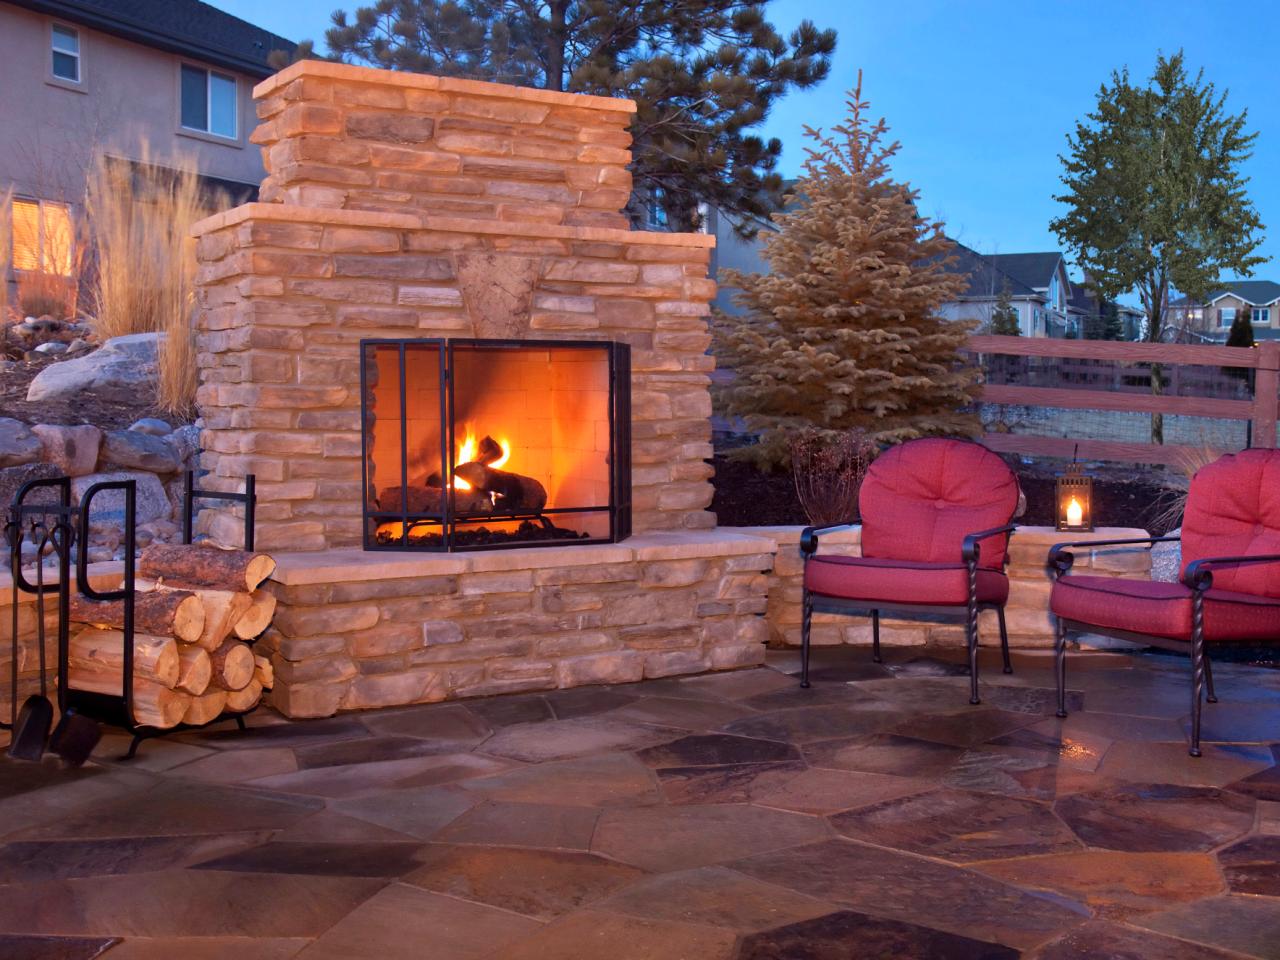 How Do You Build An Outdoor Fireplace